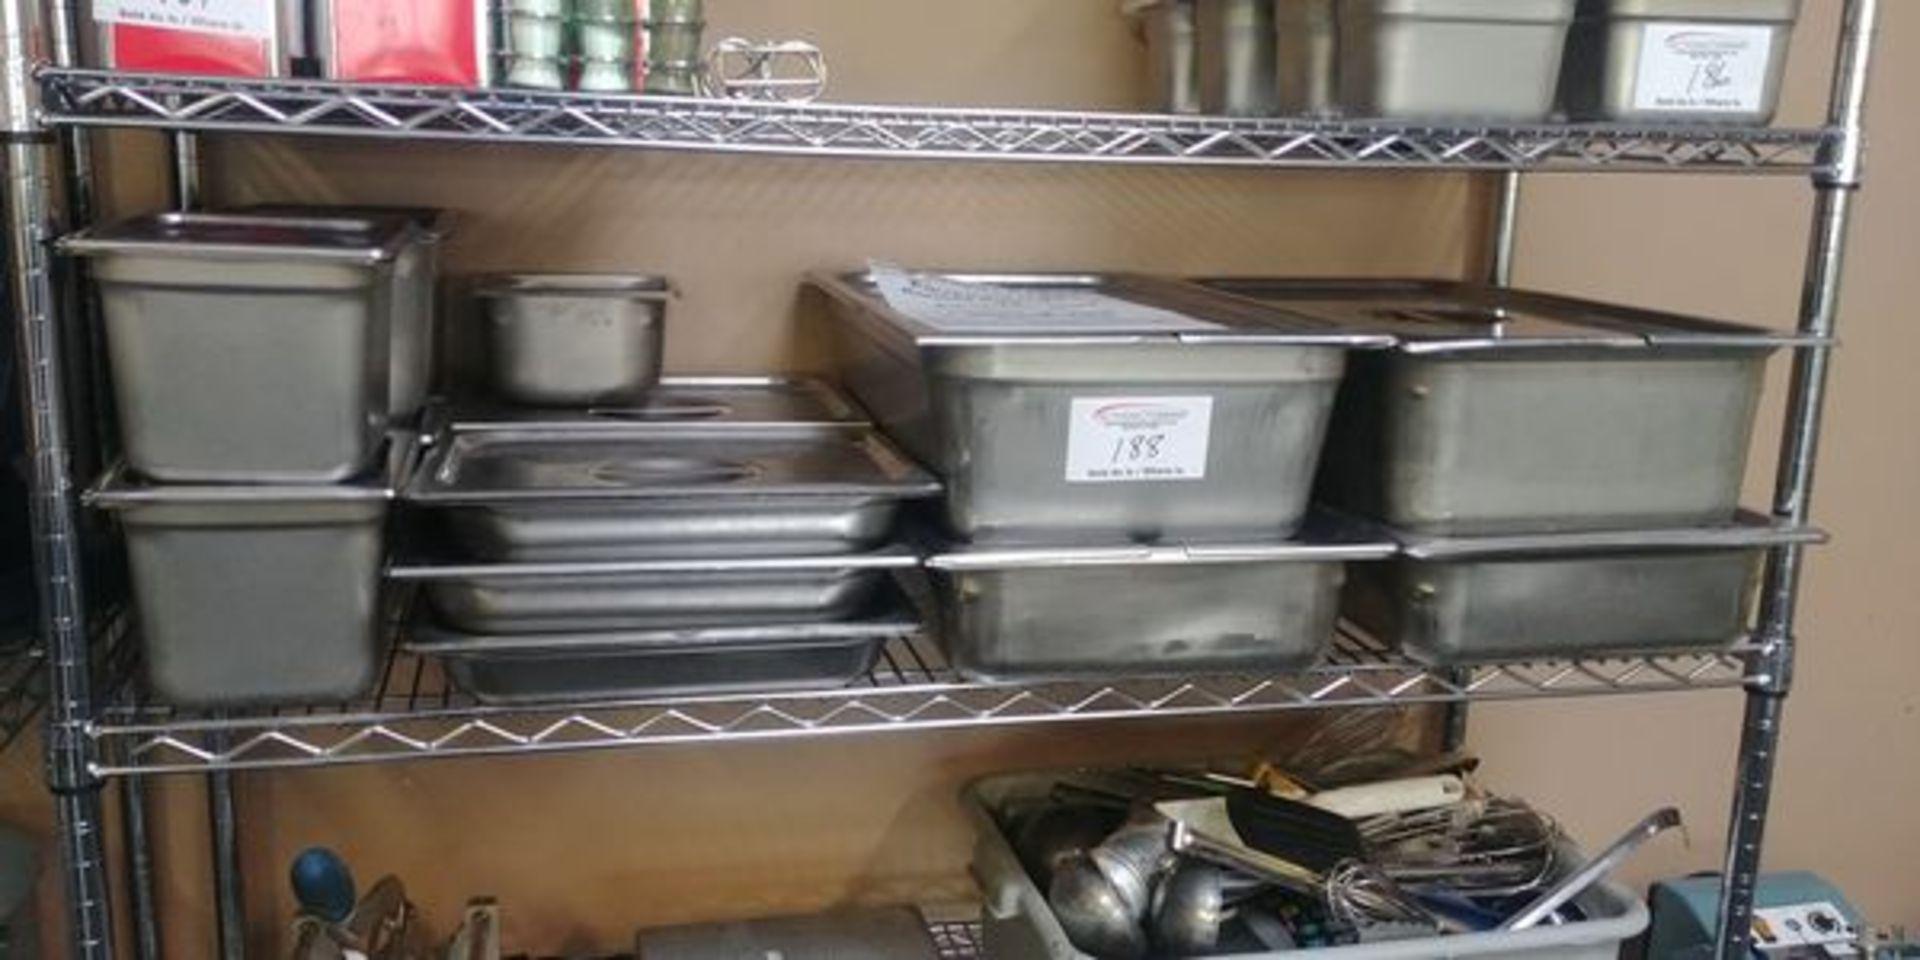 Shelf Lot of Stainless Steel Inserts with Lids